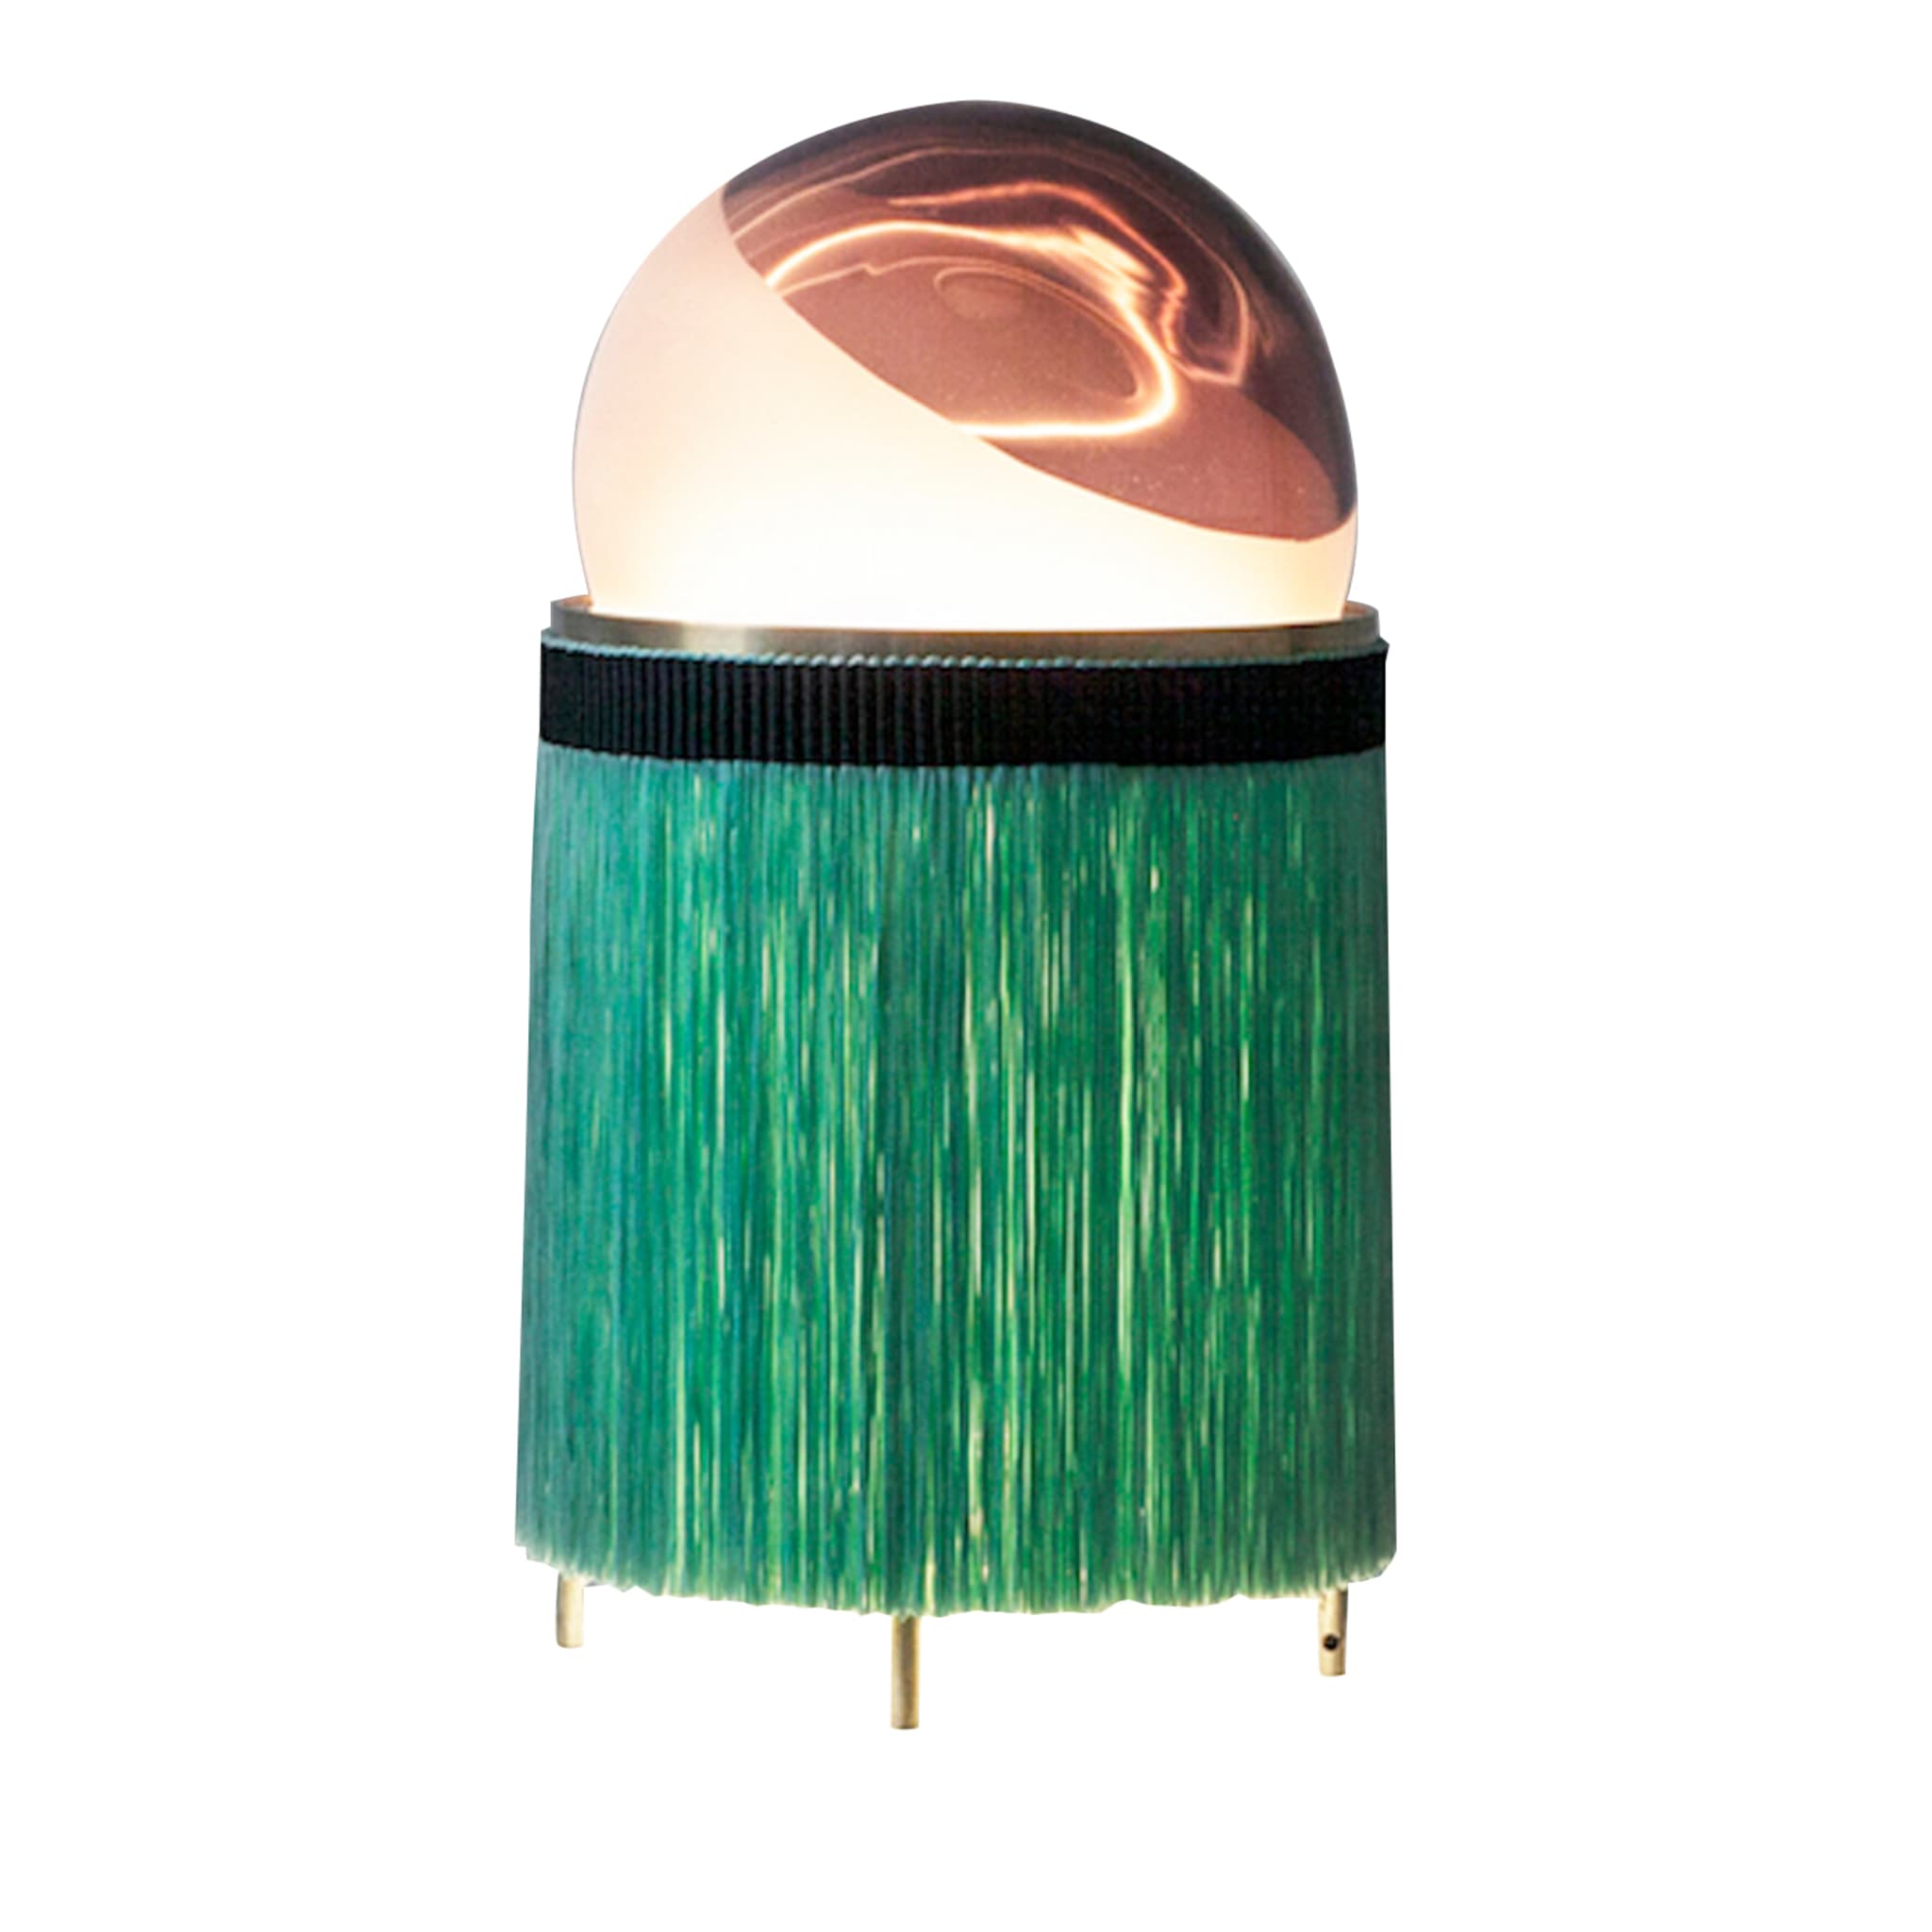 Normanna Medium Floor Lamp in Amethyst Pink and Aqua Green by Vi+M - Main view